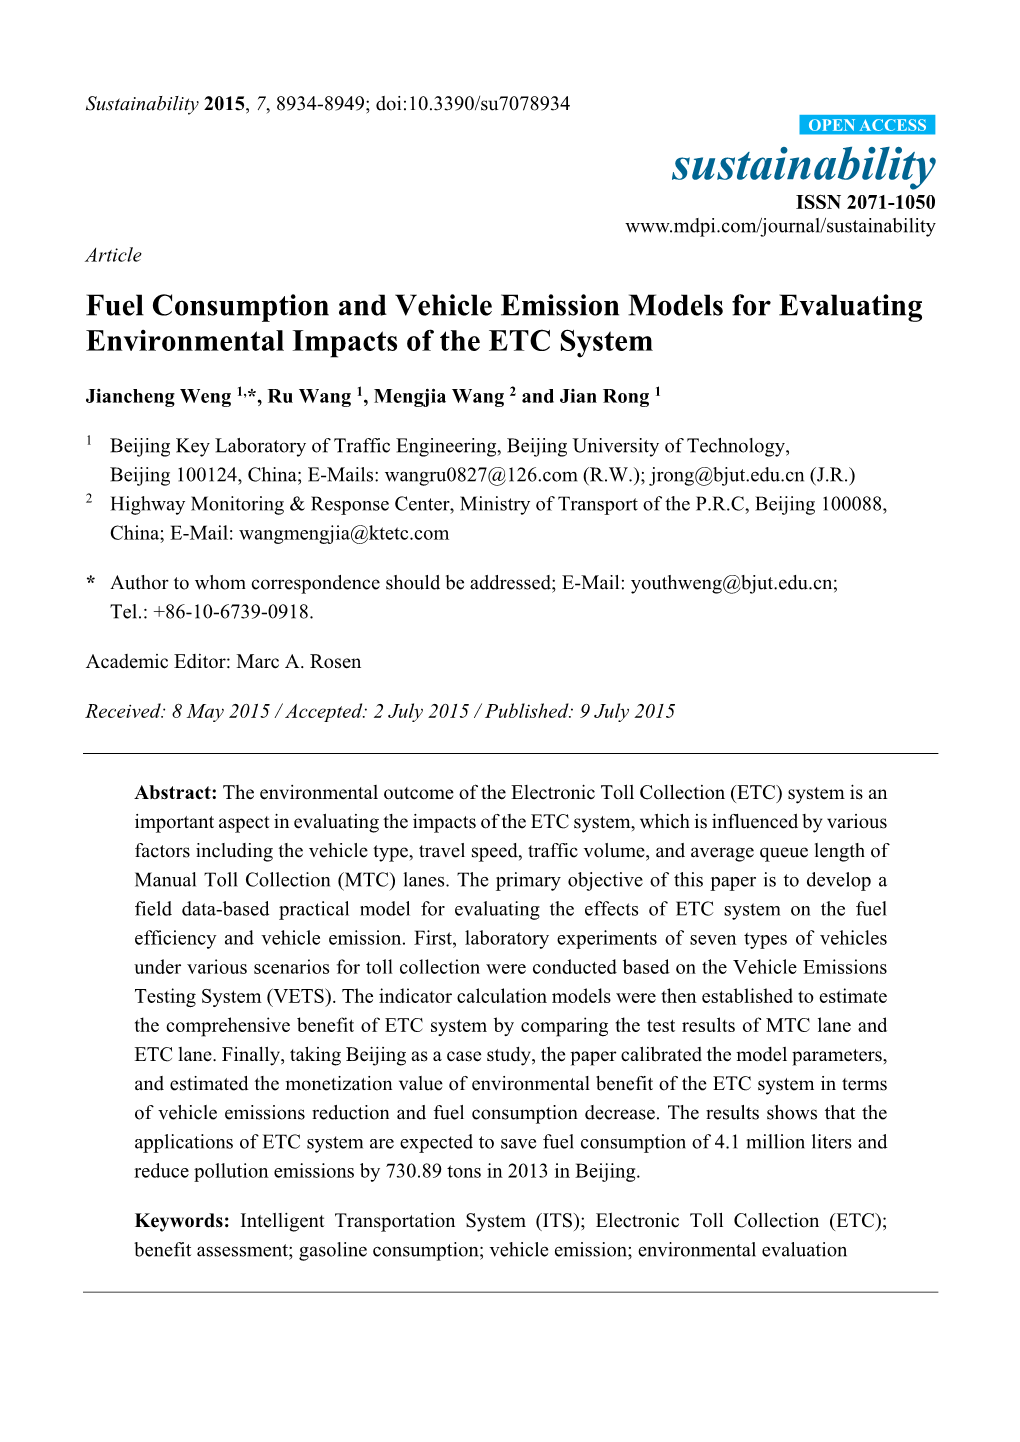 Fuel Consumption and Vehicle Emission Models for Evaluating Environmental Impacts of the ETC System